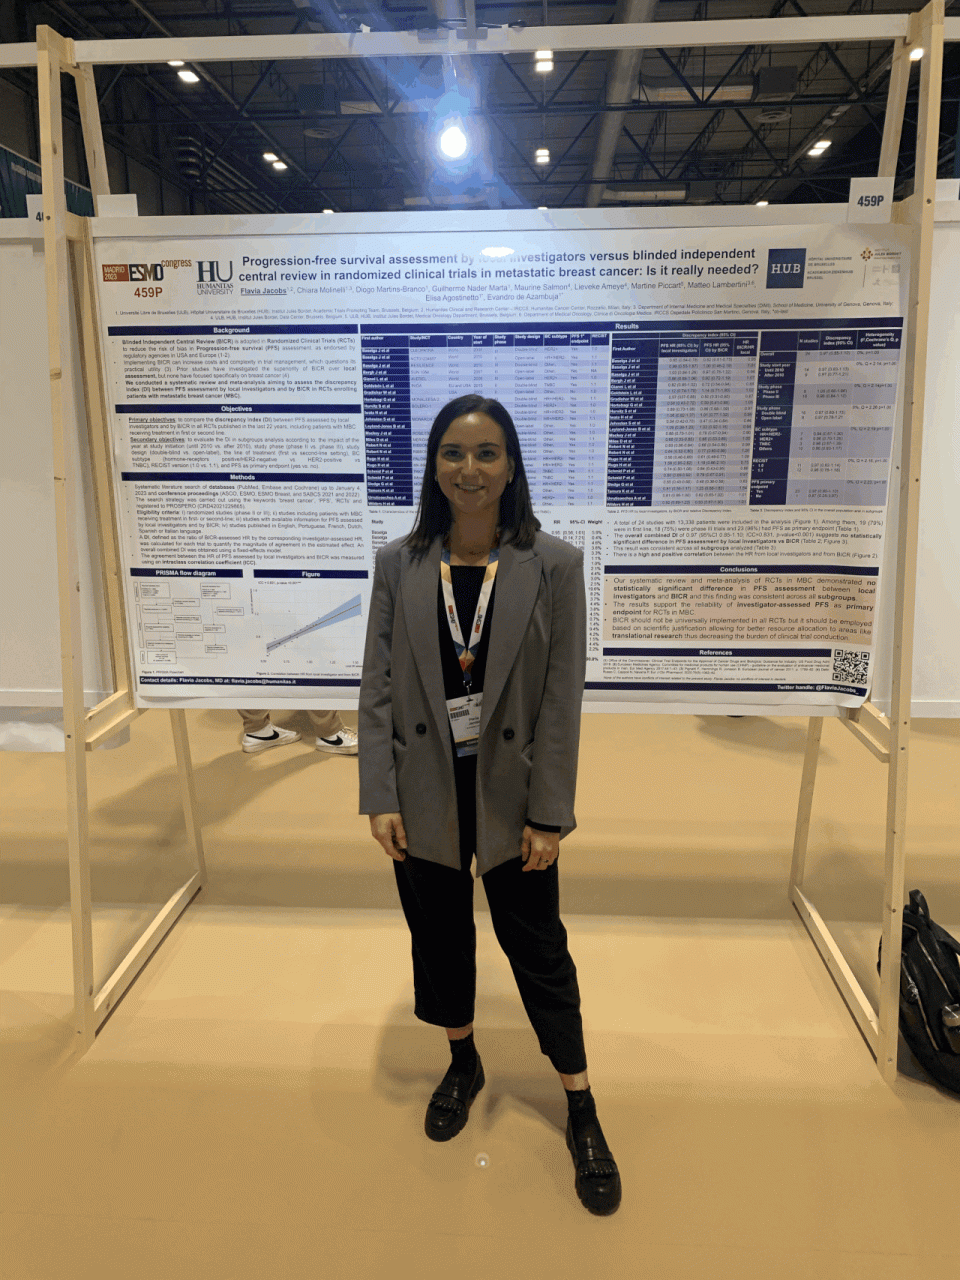 Flavia Jacobs: At ESMO23 we presented the results of our systematic review and meta-analysis evaluating PFS by central vs. local assessment in randomized clinical trials in metastatic breast cancer